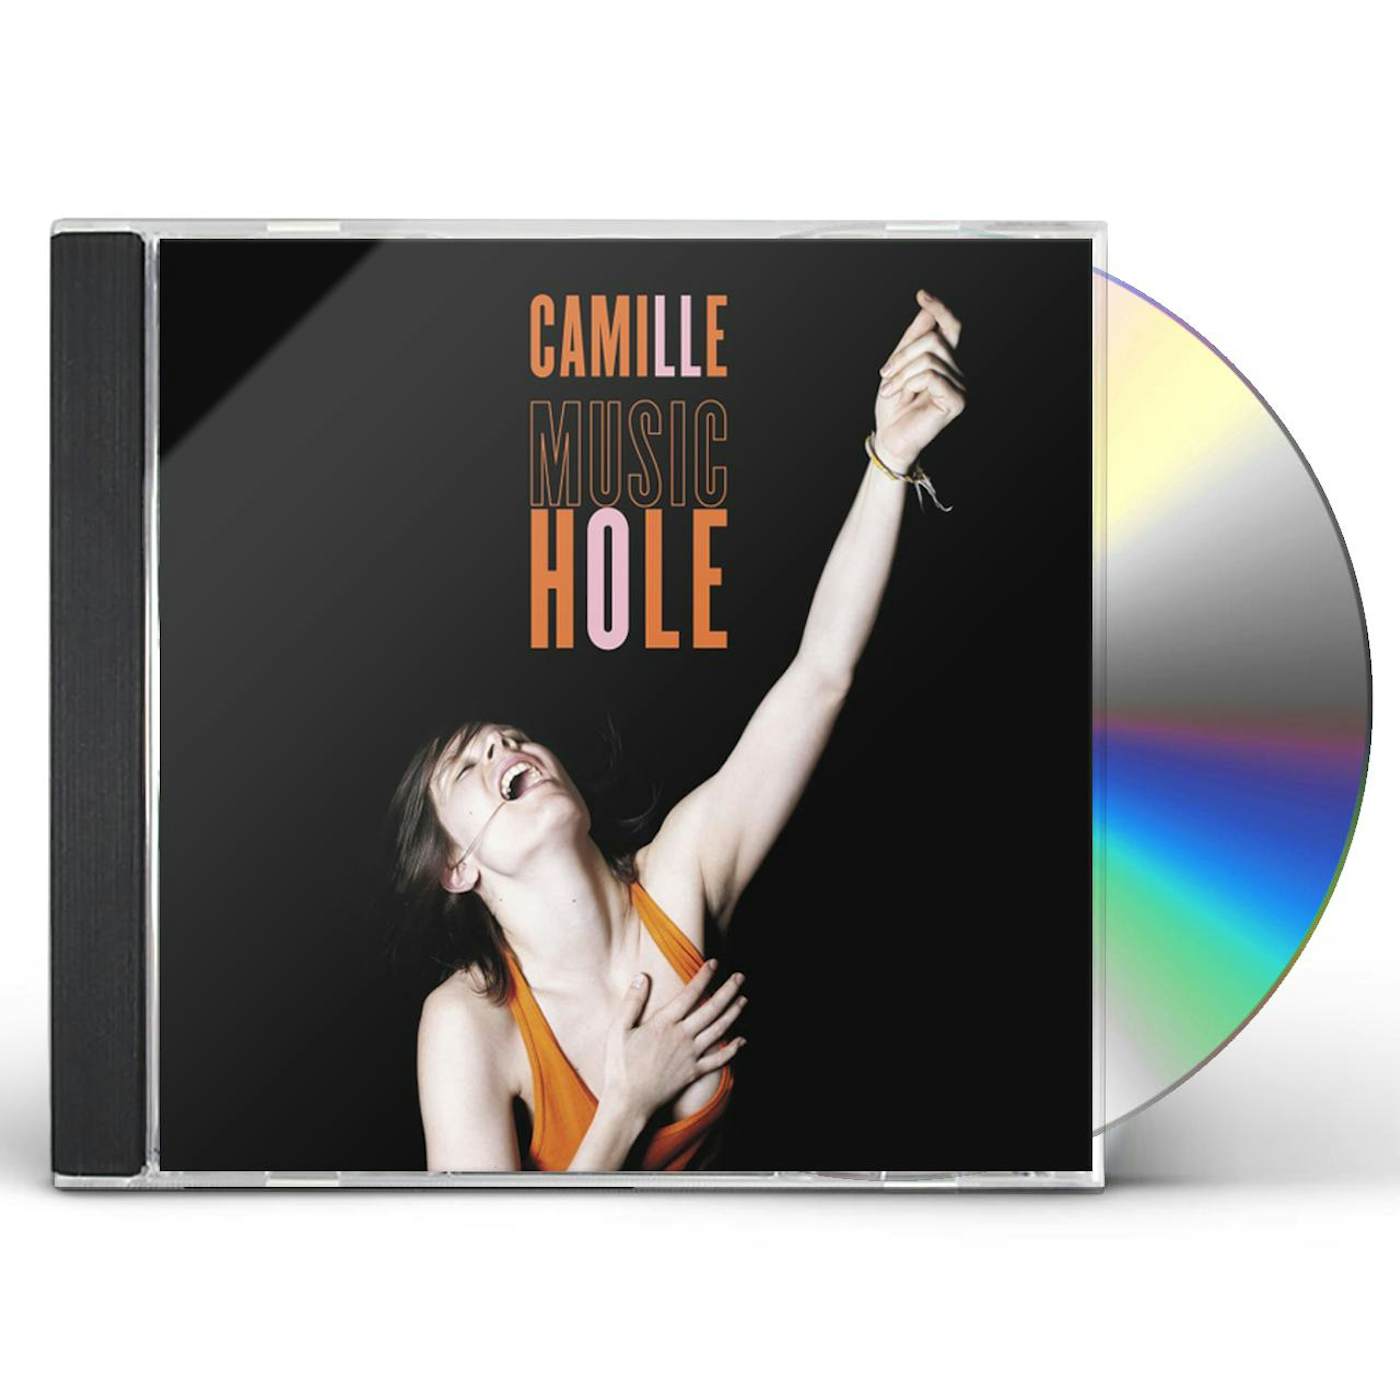 Camille MUSIC HOLE CD